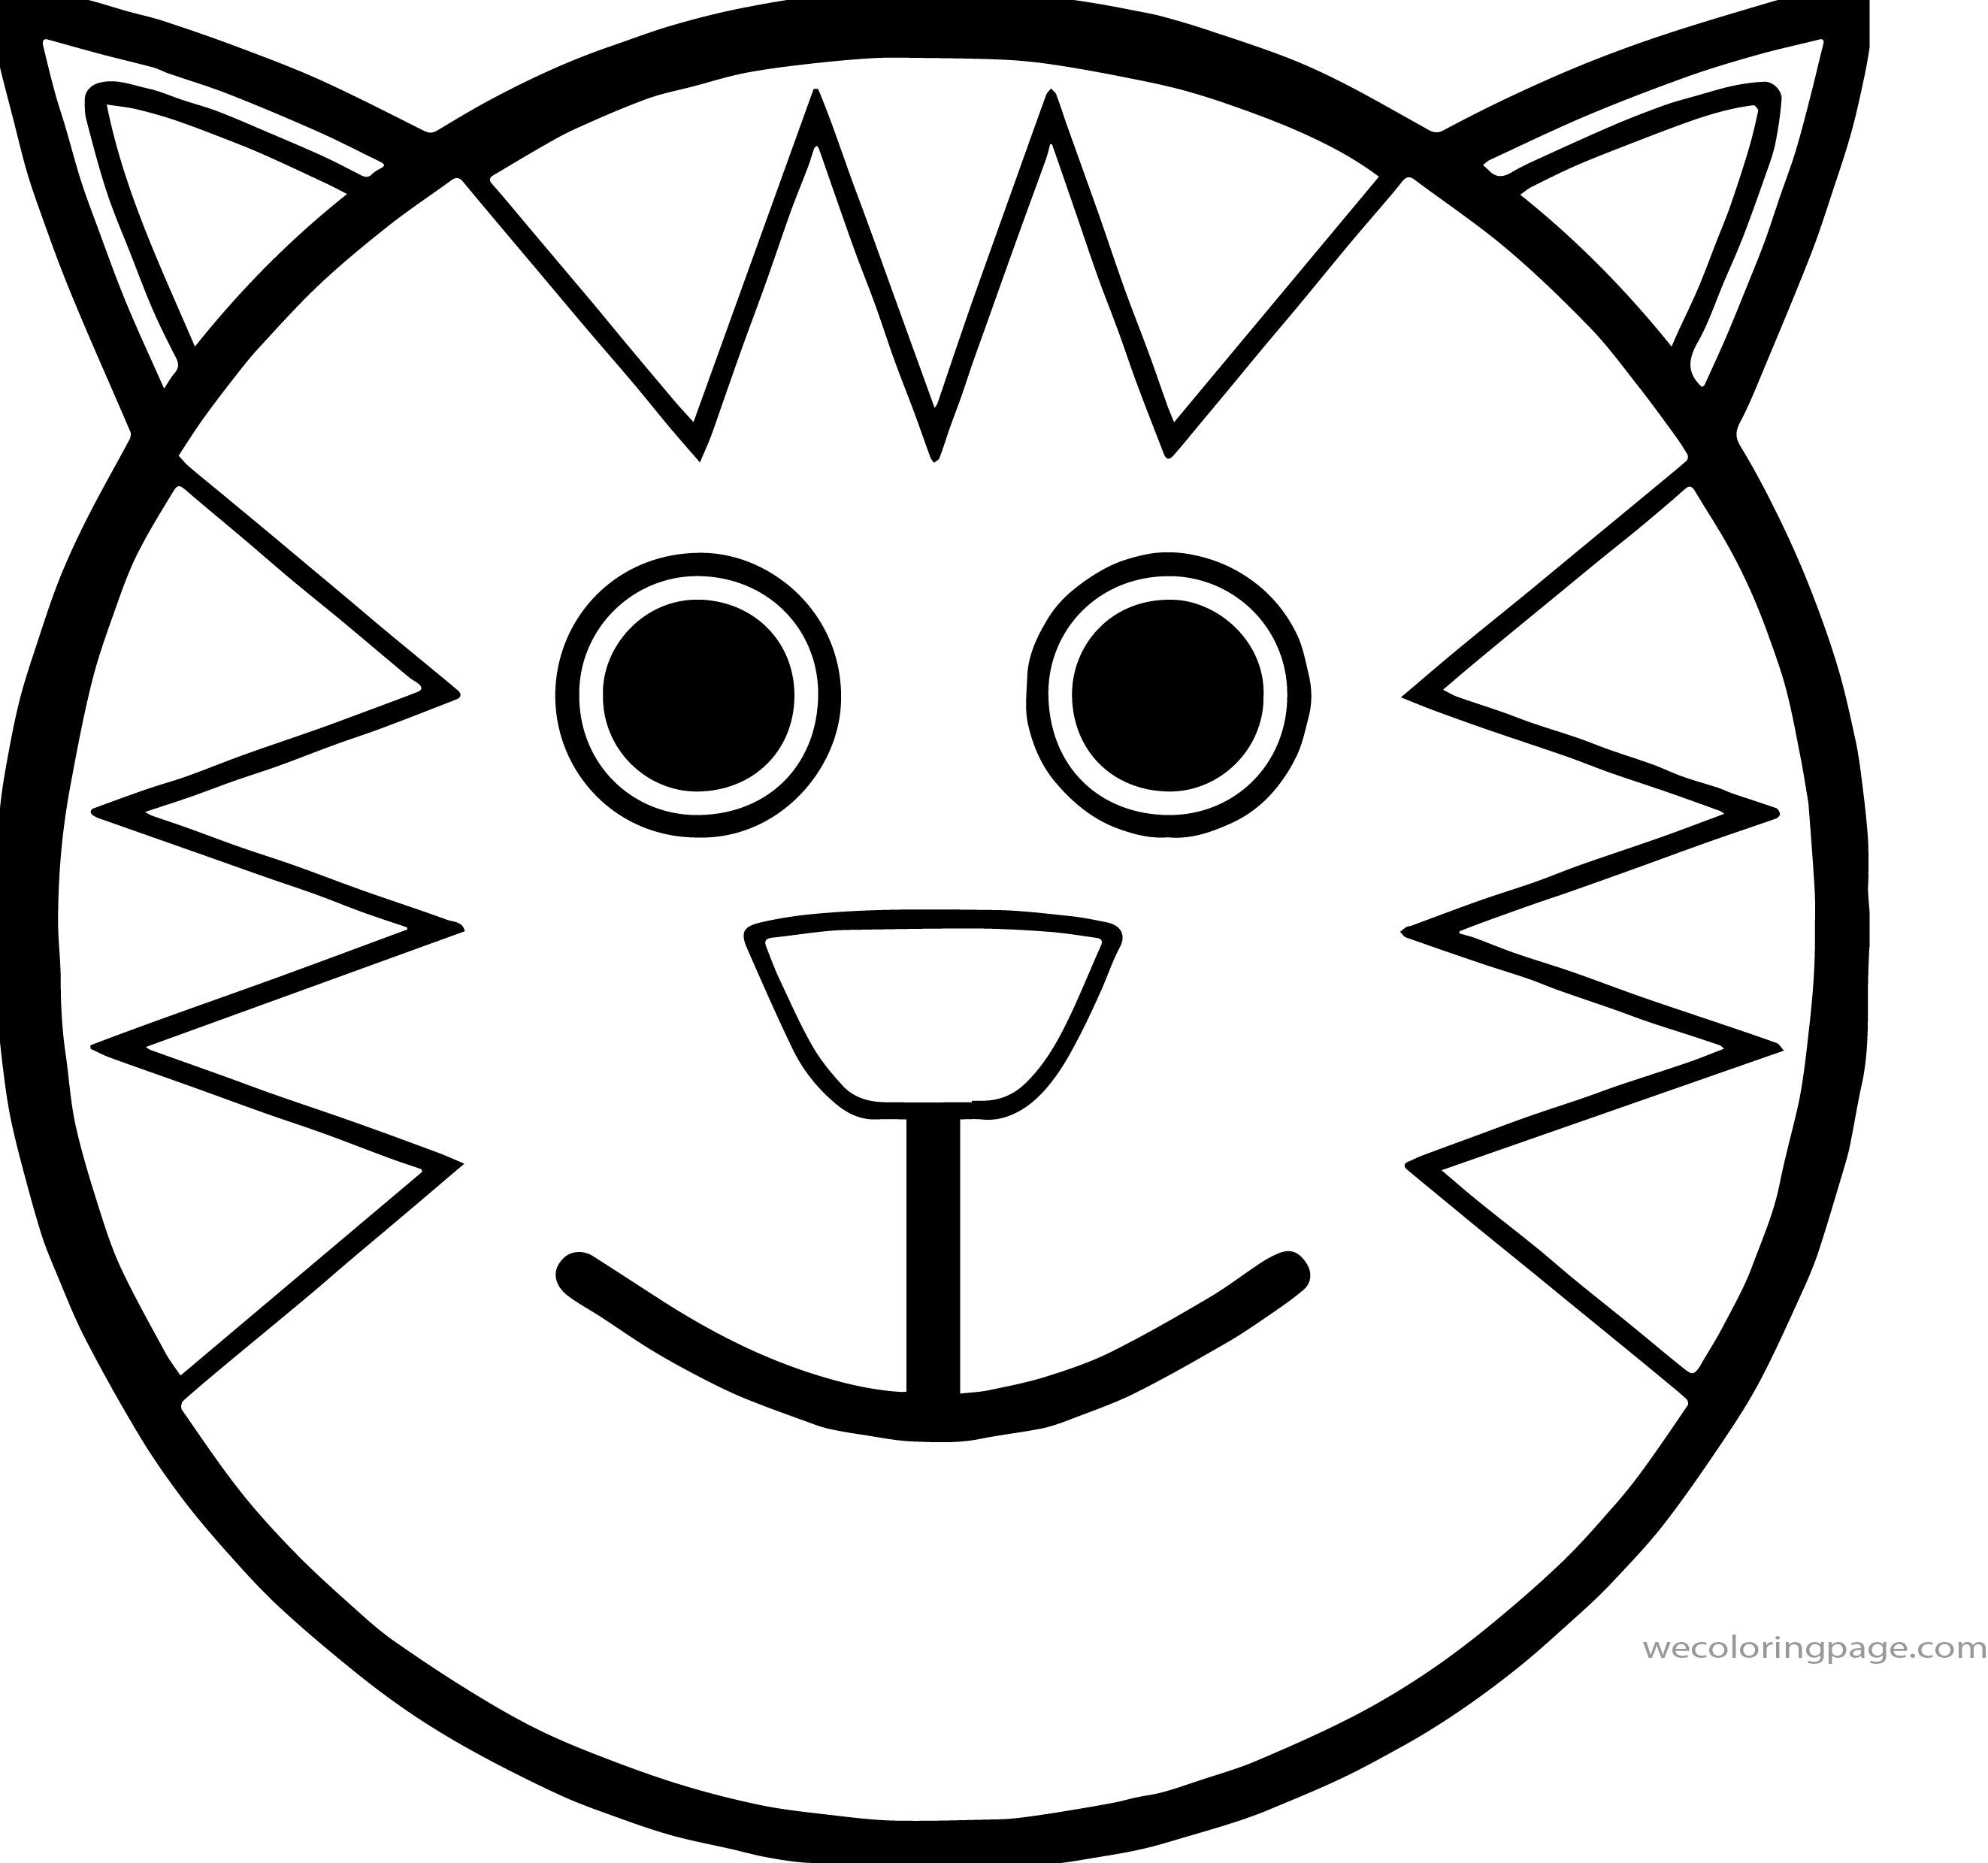 Kitten Face Coloring Page – probably the best 20 fresh ideas for ...